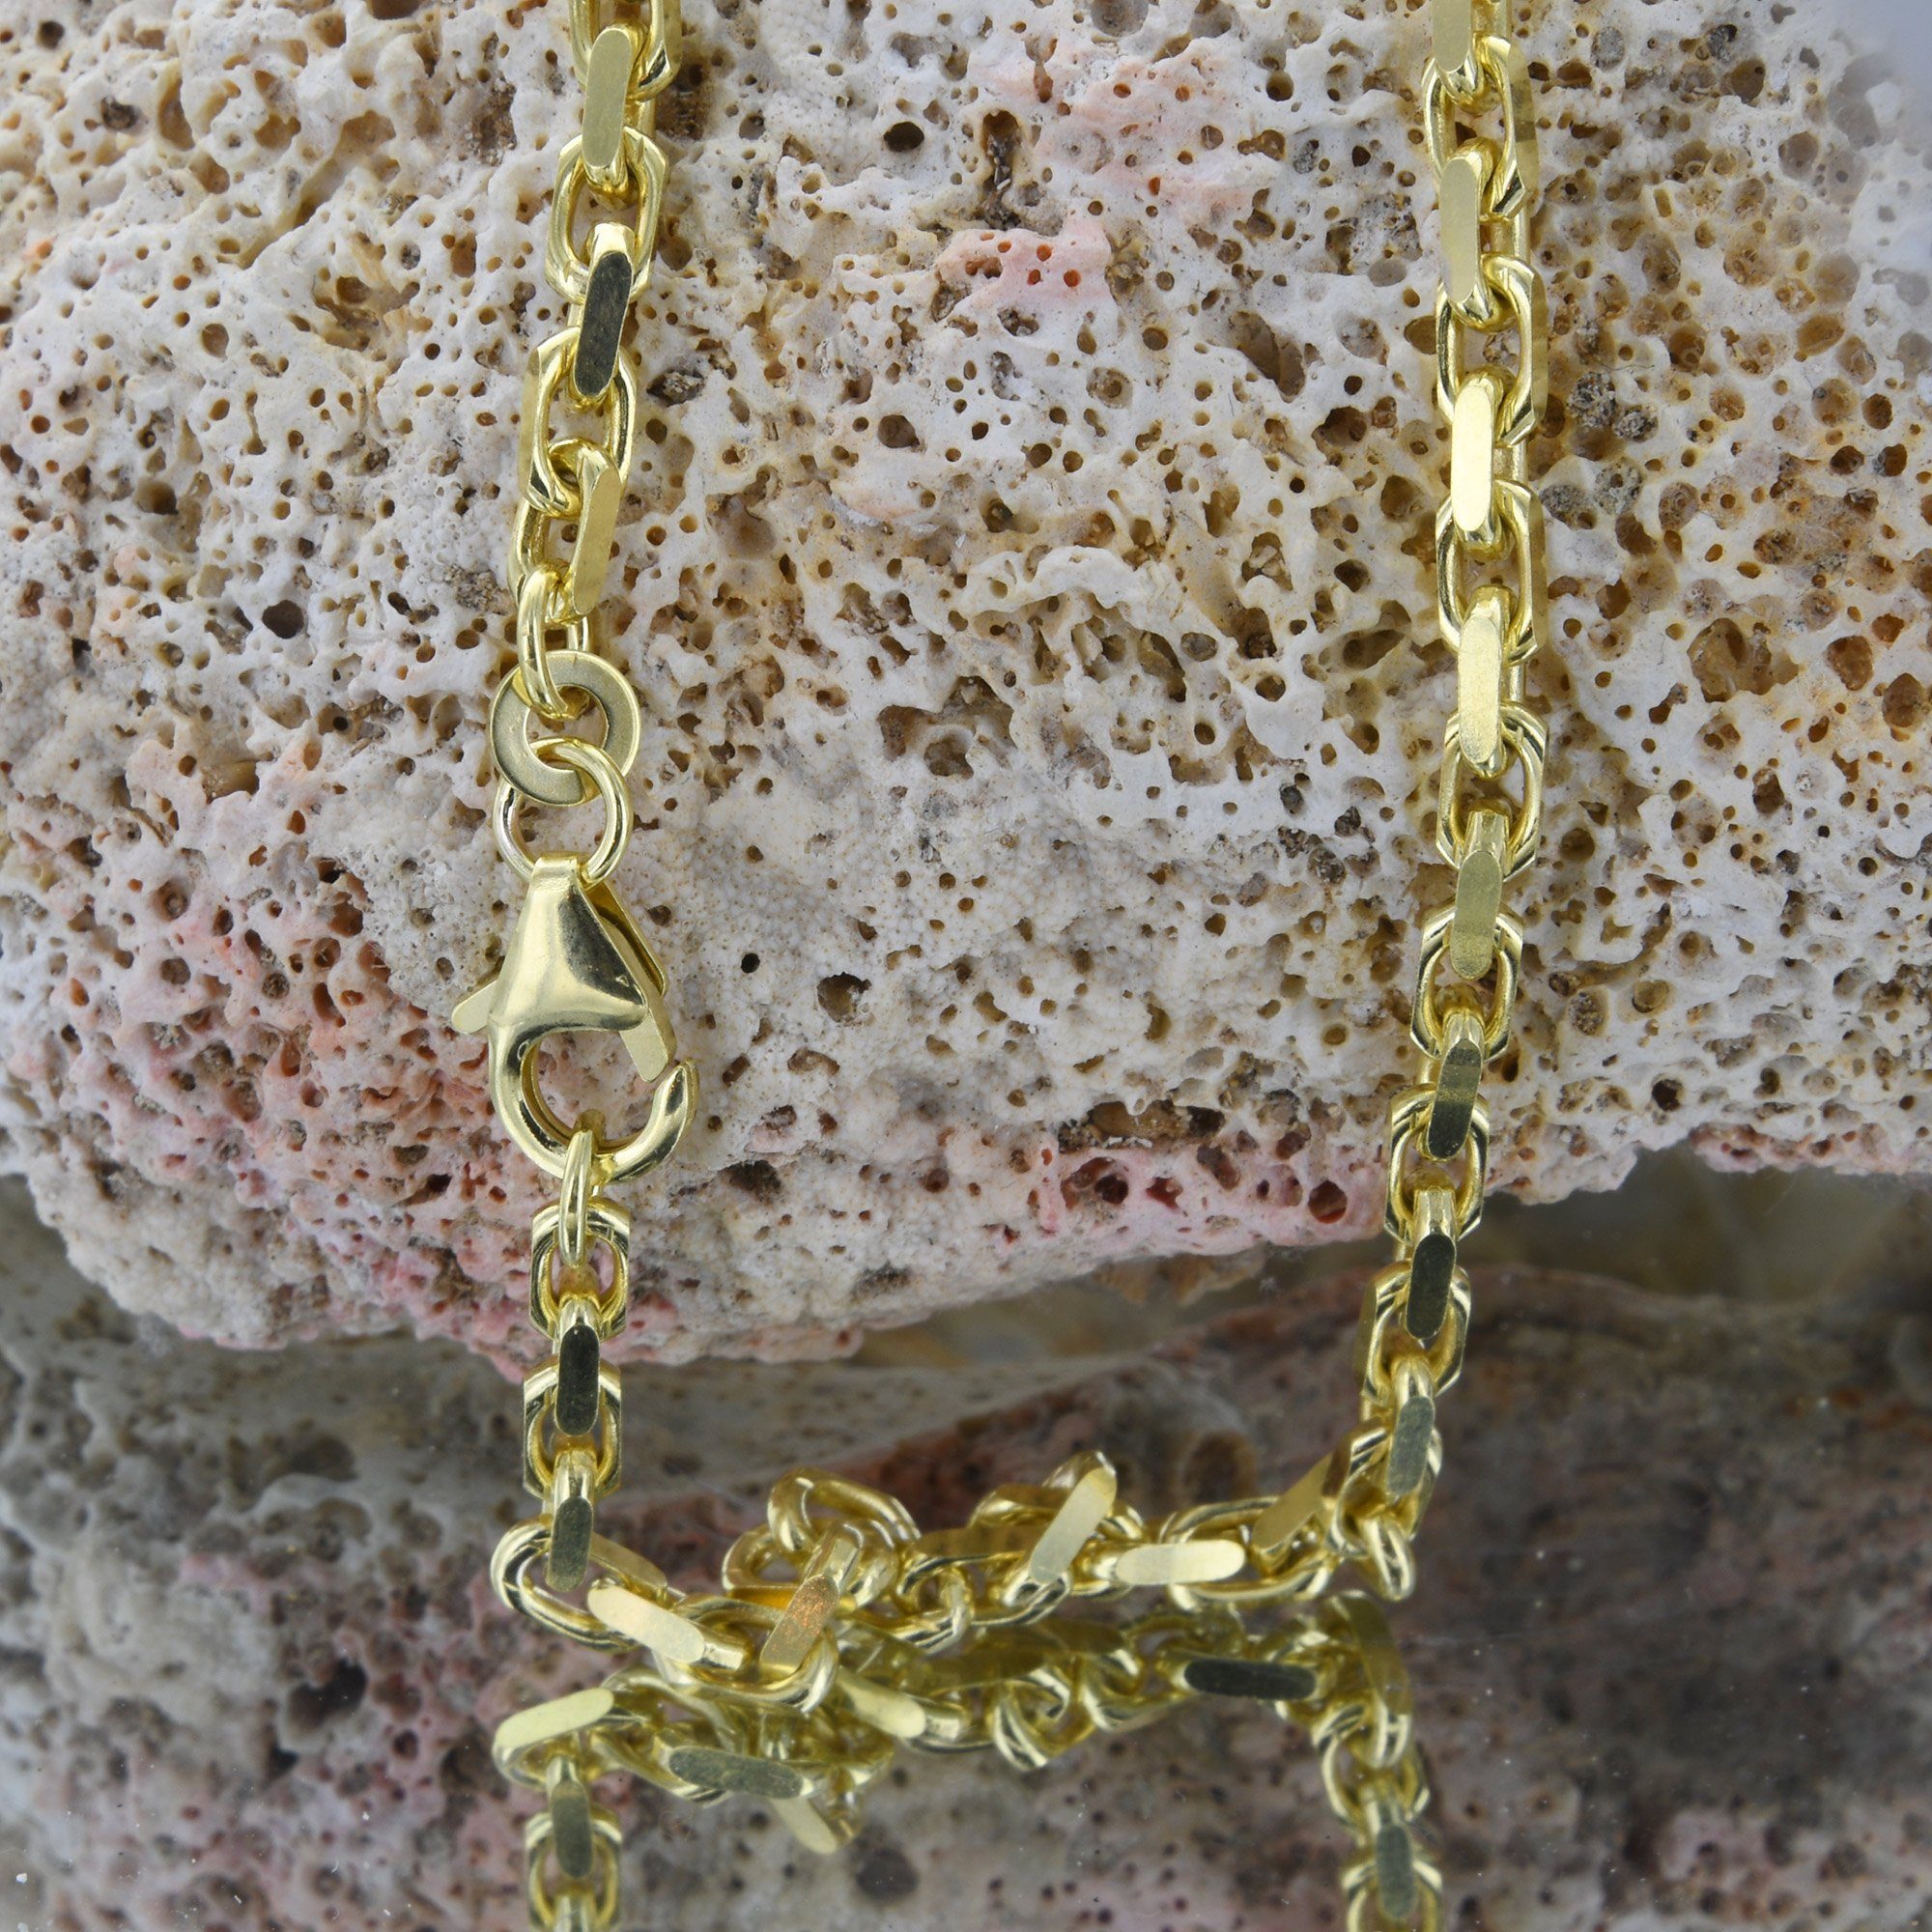 Goldkette, HOPLO Made in Germany